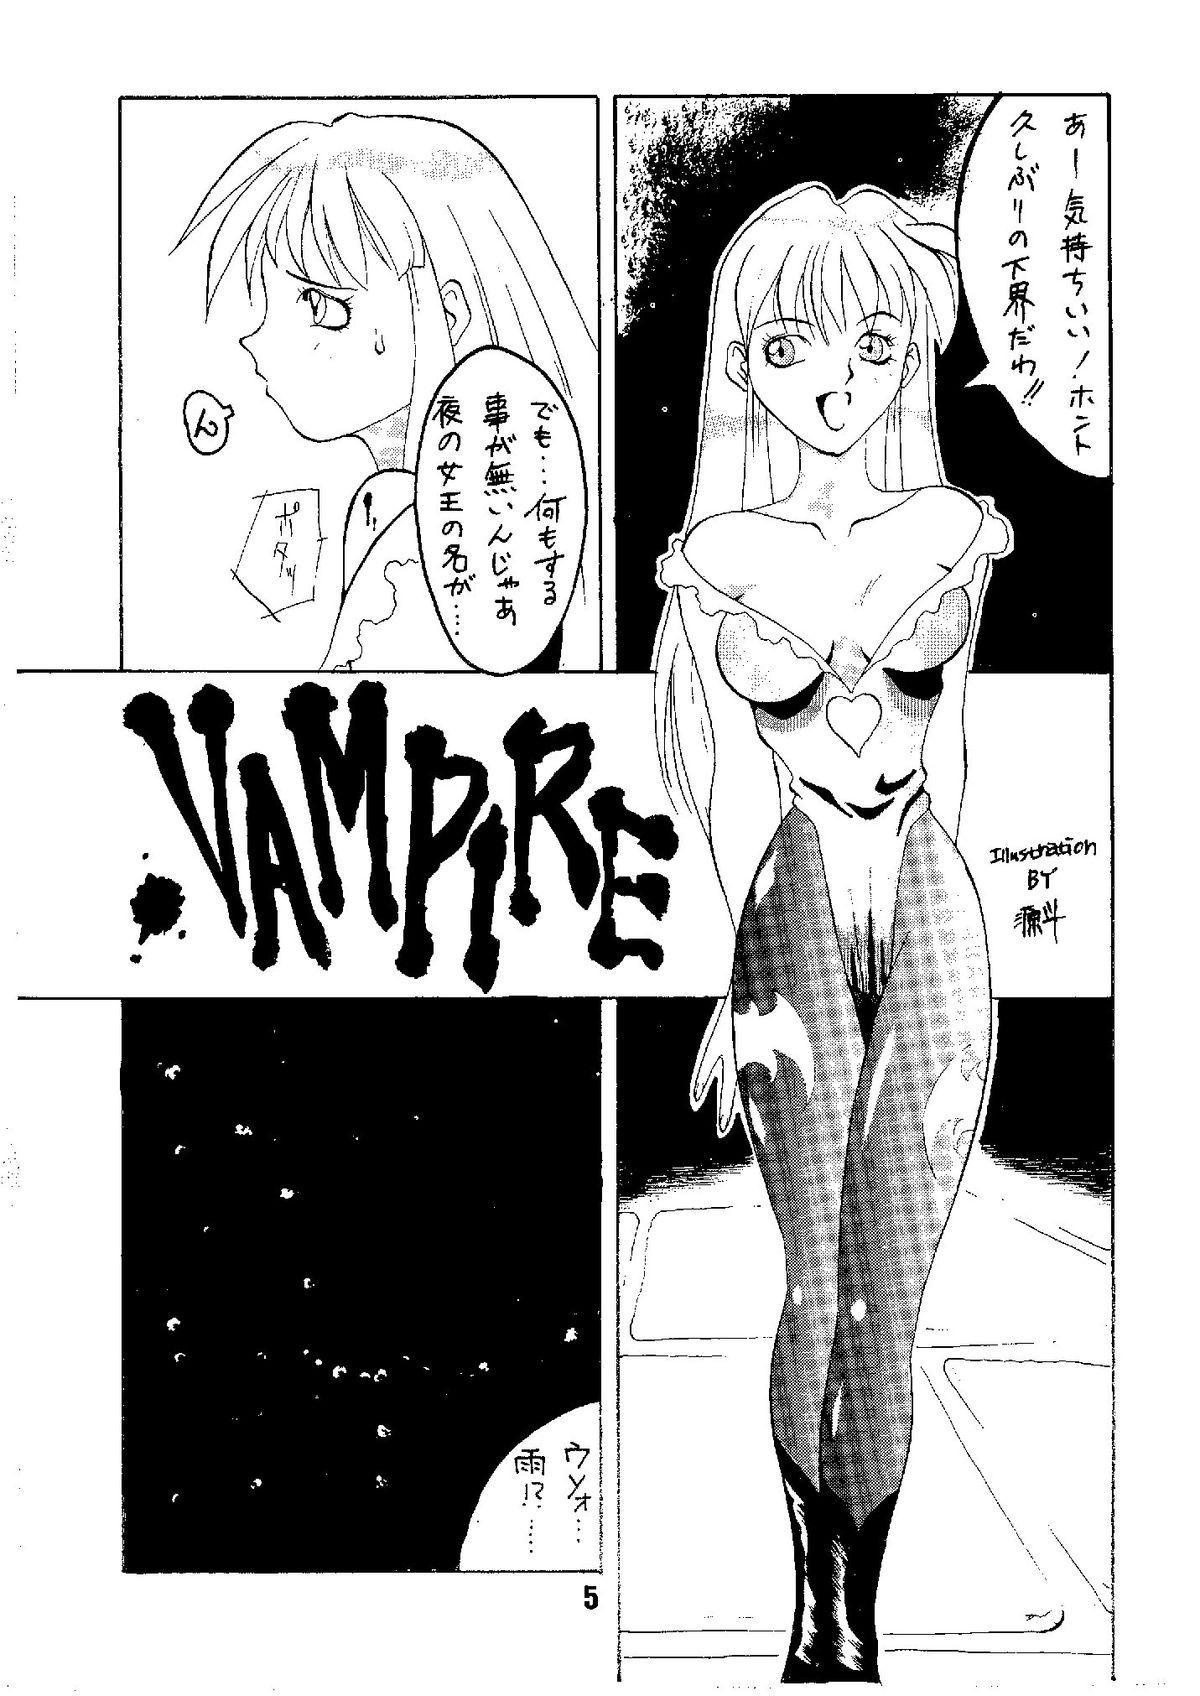 Hooker Shine of Darkness - Darkstalkers Anal Play - Page 5